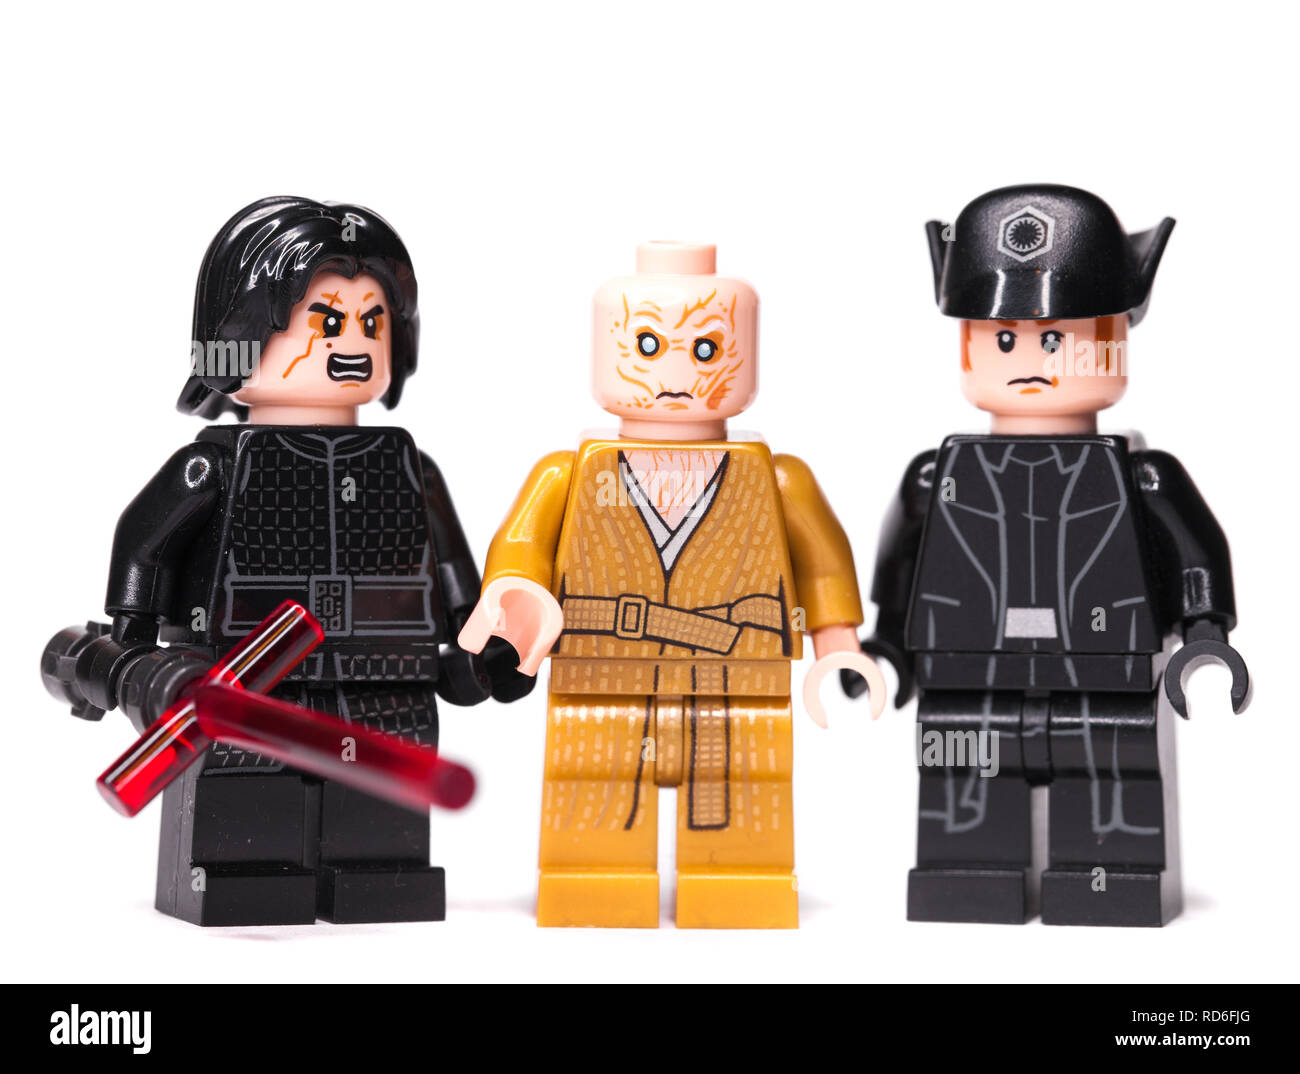 Lego Star Wars Characters High Resolution Stock Photography and Images -  Alamy